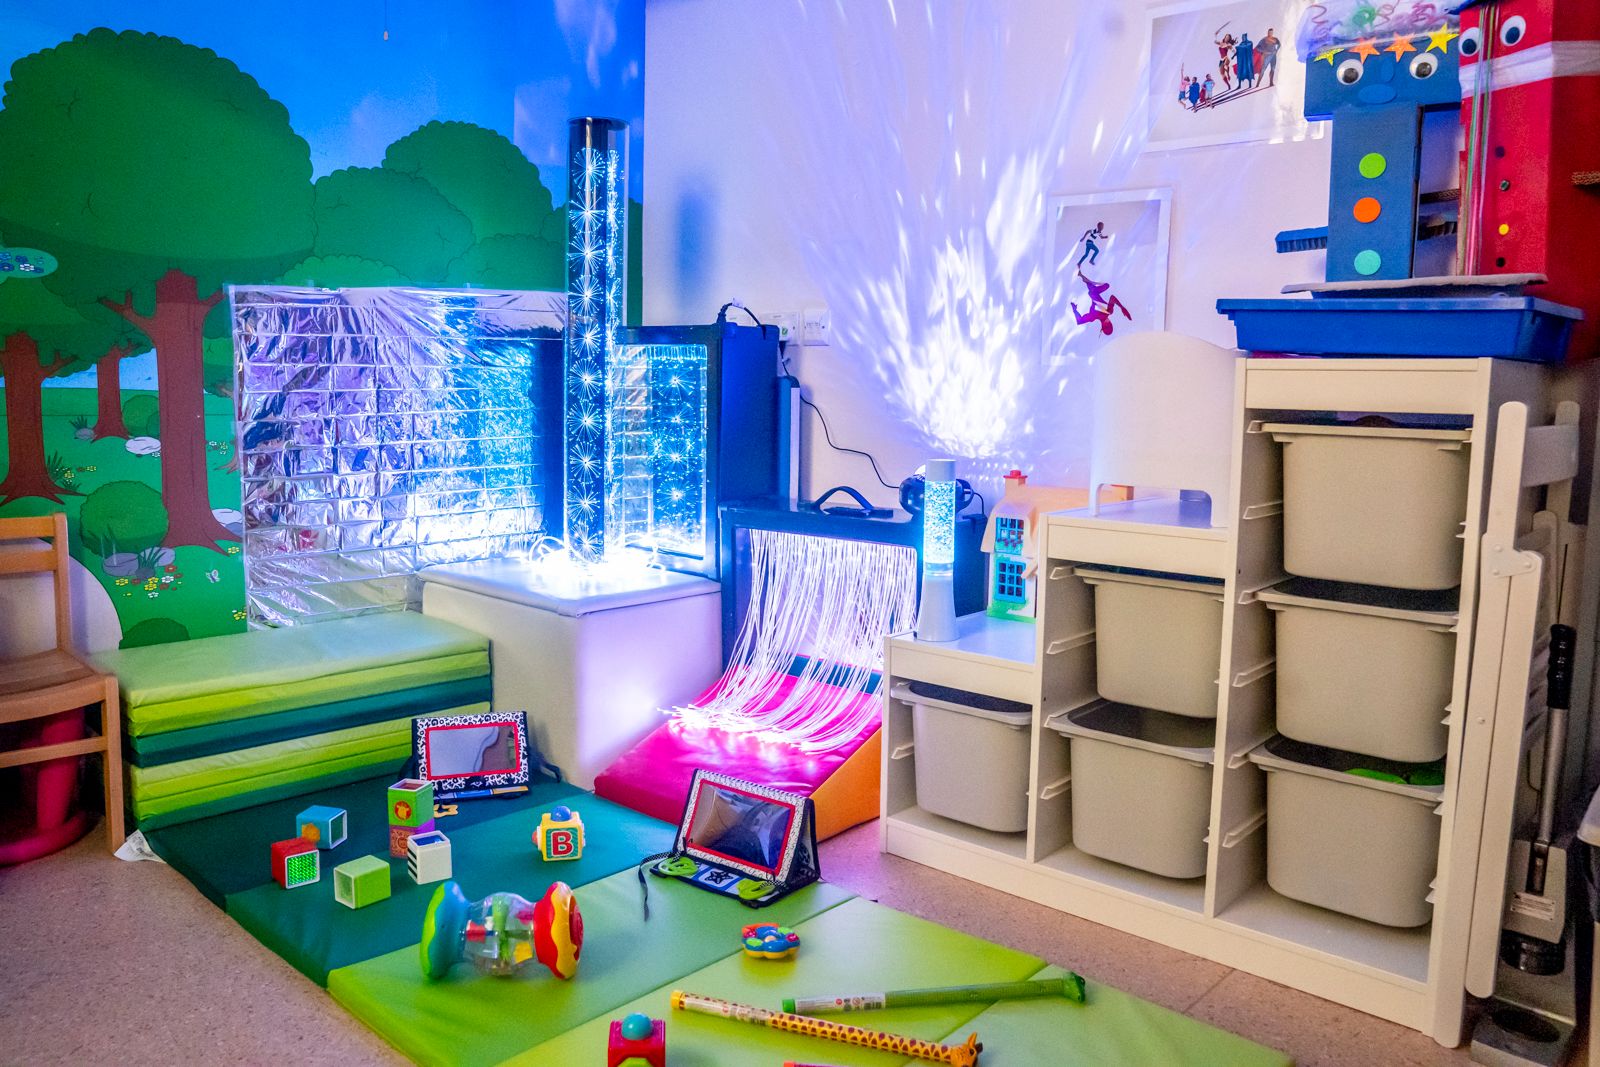 Priority Space helps move hospital playroom up the agenda